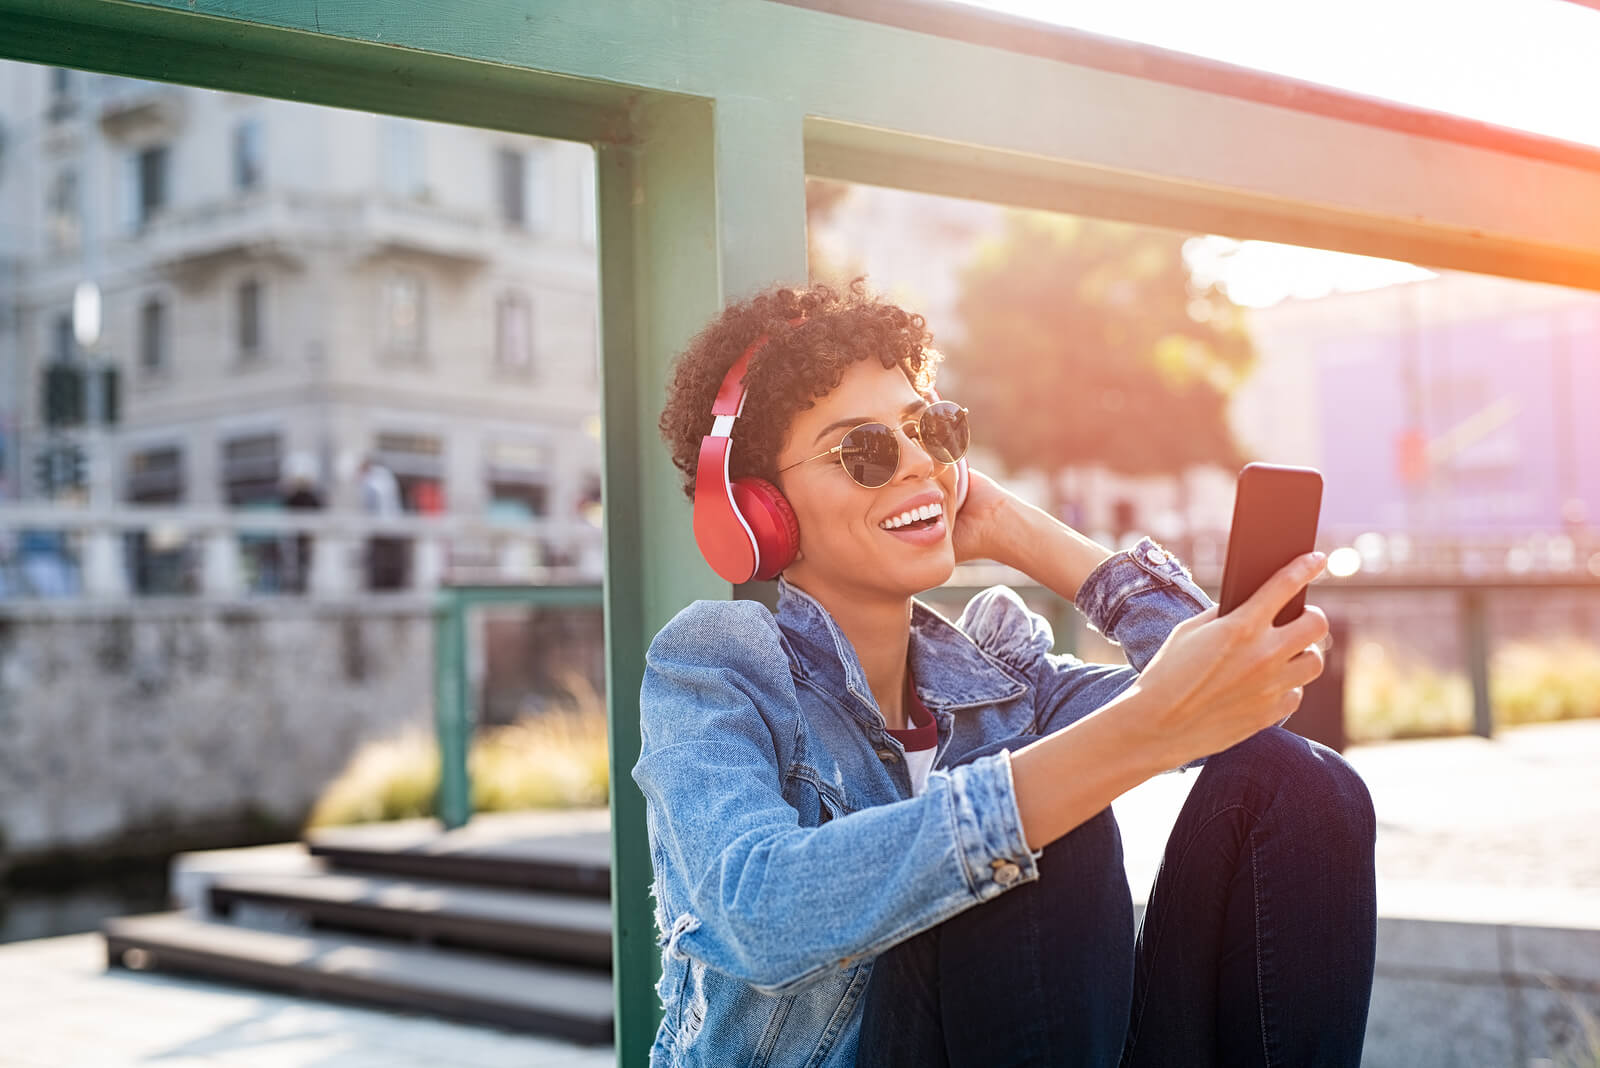 Young beautiful woman holding smartphone and listening to music with wireless headphones. Cheerful smiling girl with red headphones changing music track on phone. Carefree urban teen enjoying songs.